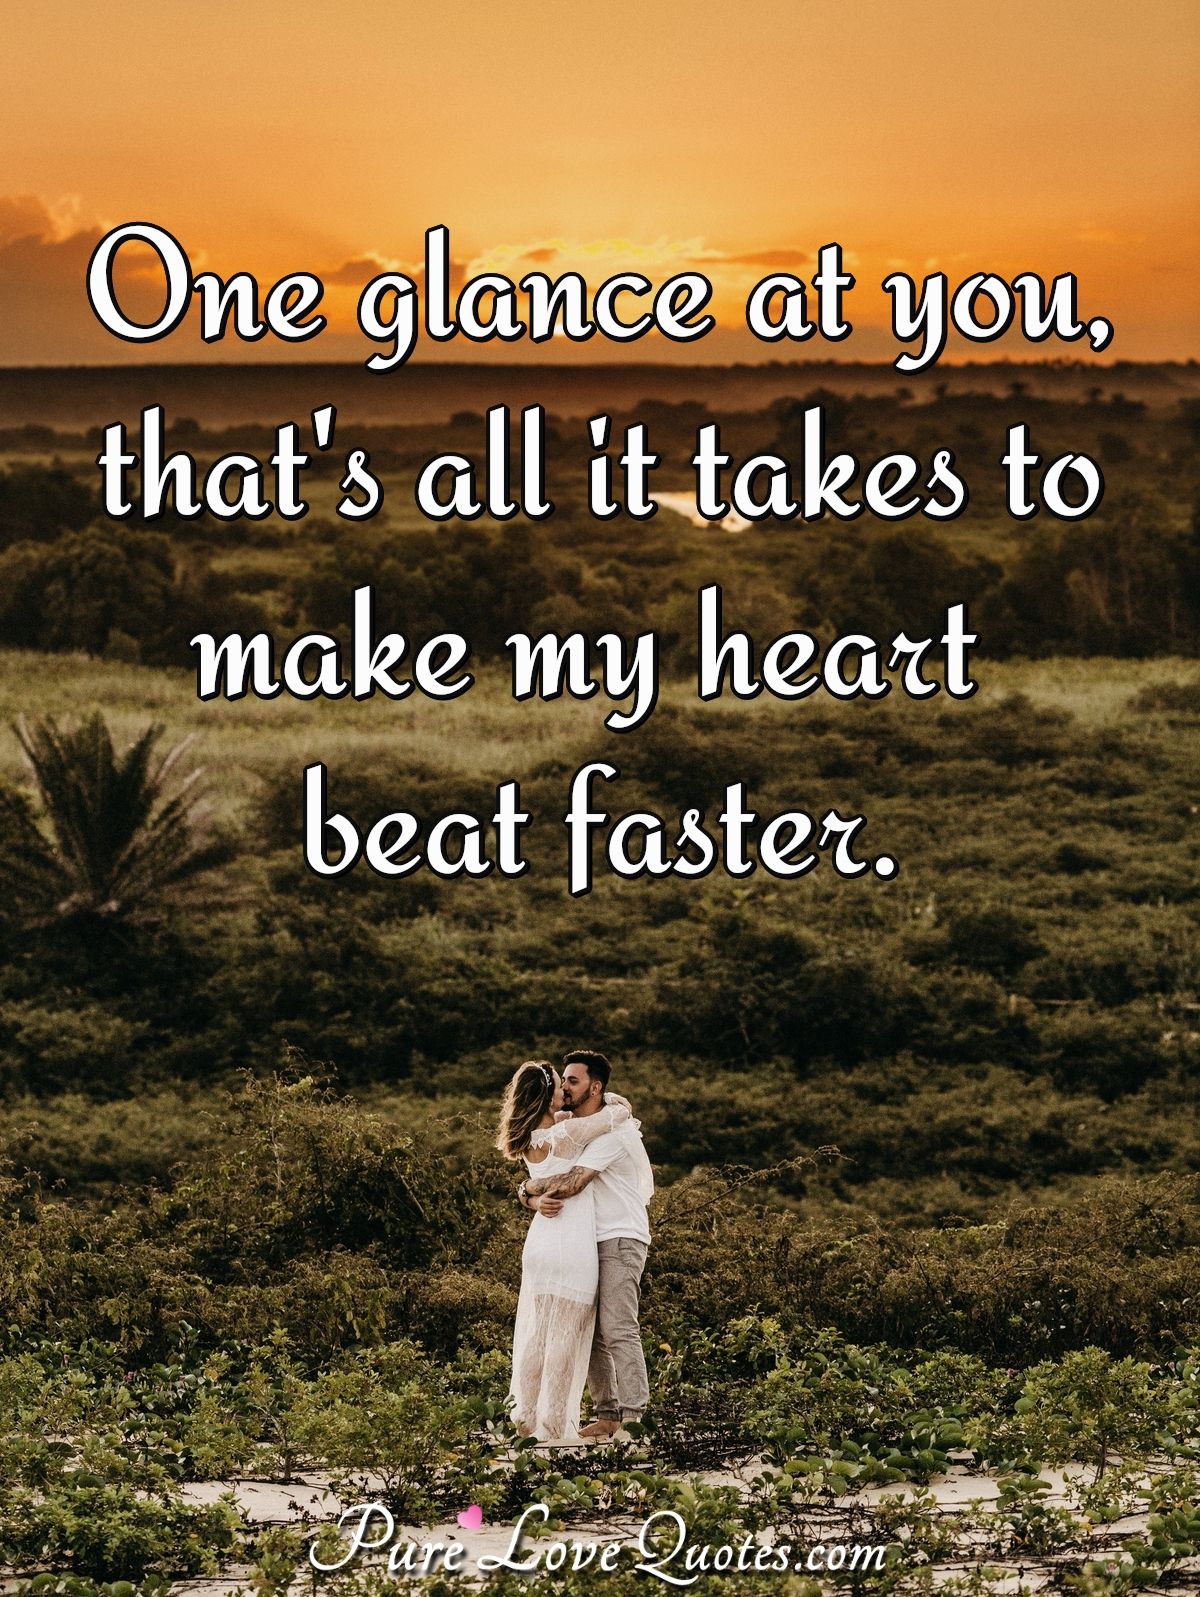 One glance at you, that's all it takes to make my heart beat faster. - Anonymous